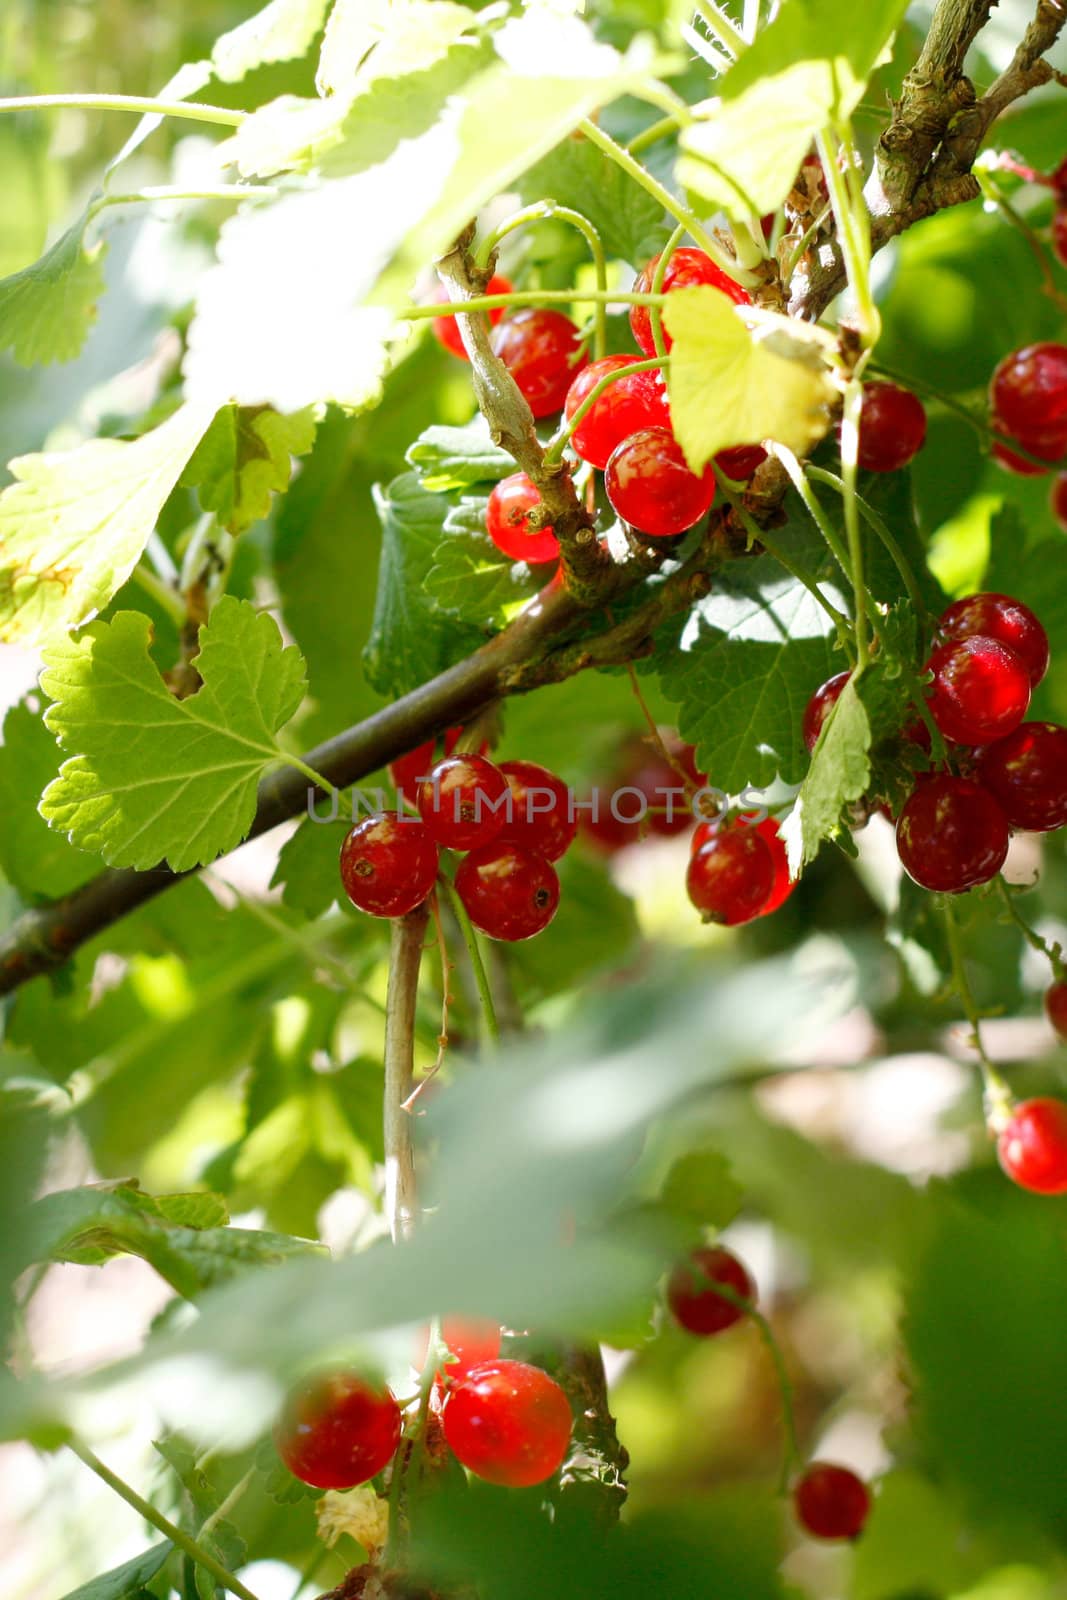 Delicious ripe red currants ready to be picked